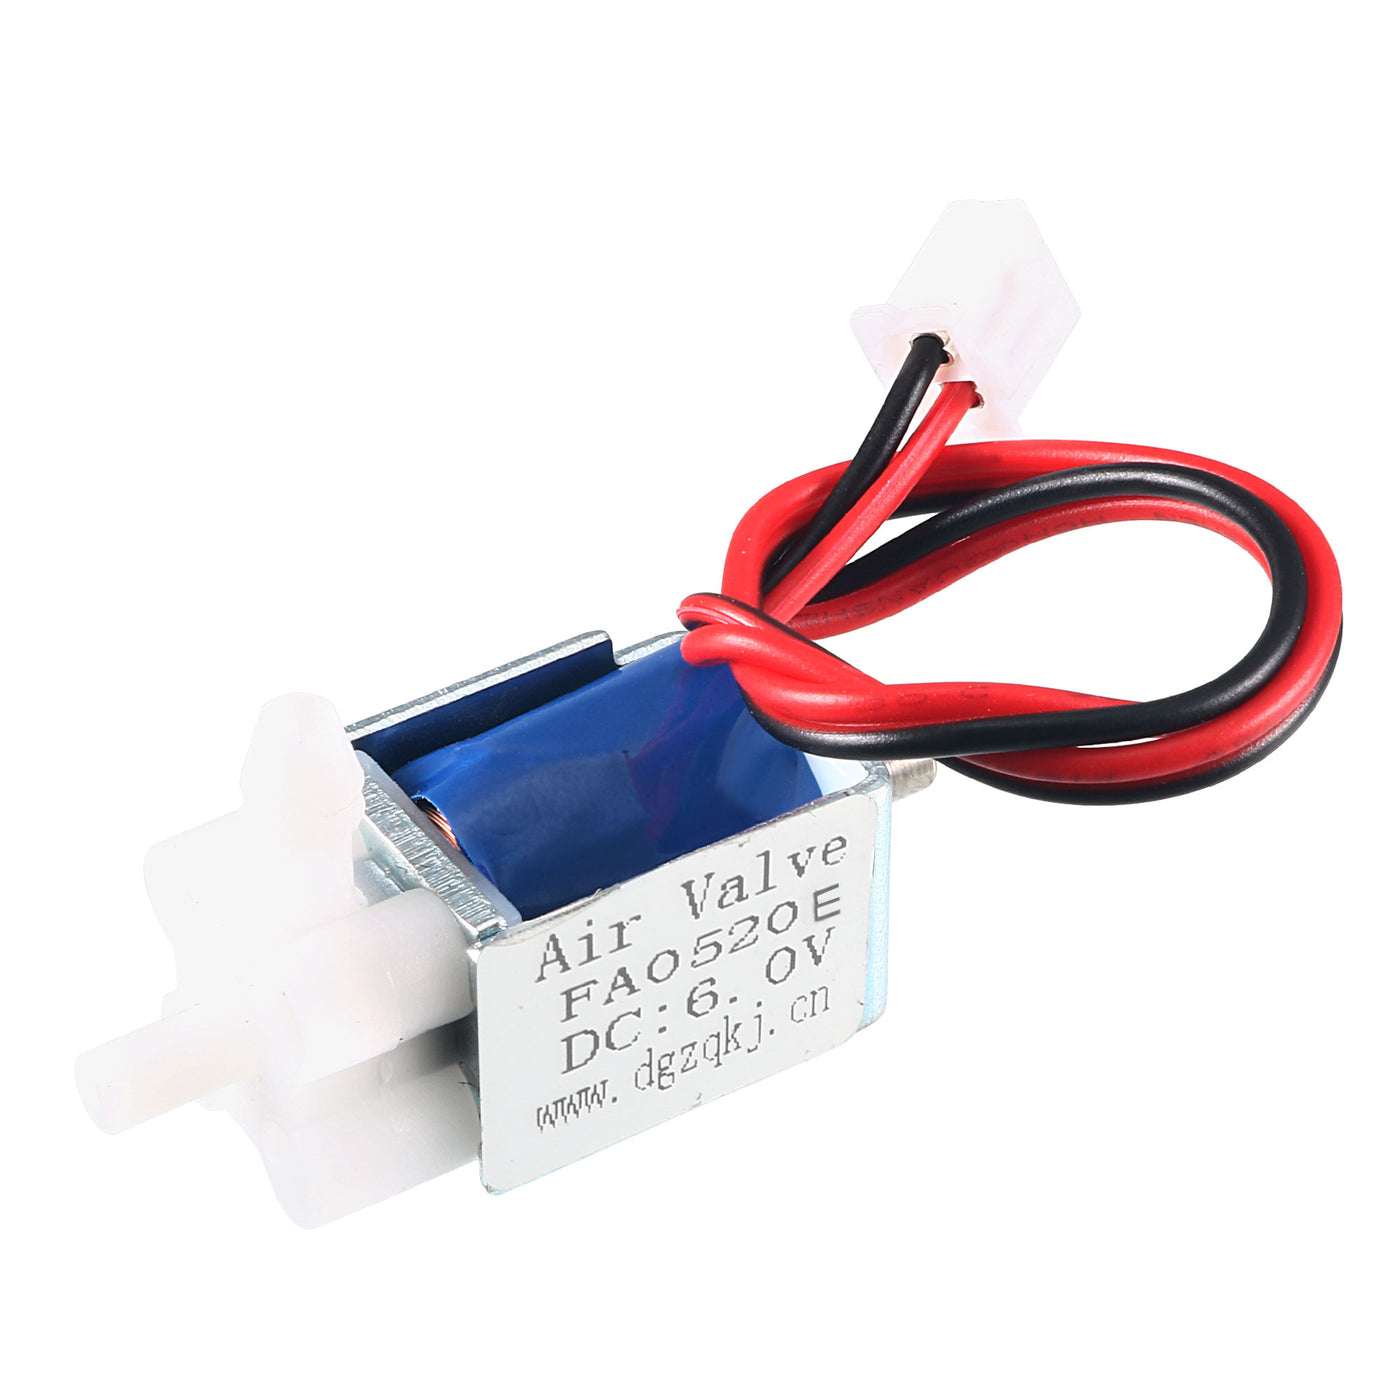 uxcell Uxcell Miniature Solenoid Valve 2 Position 3 Way DC6V 0.38A Air Solenoid Valve, 2pcs